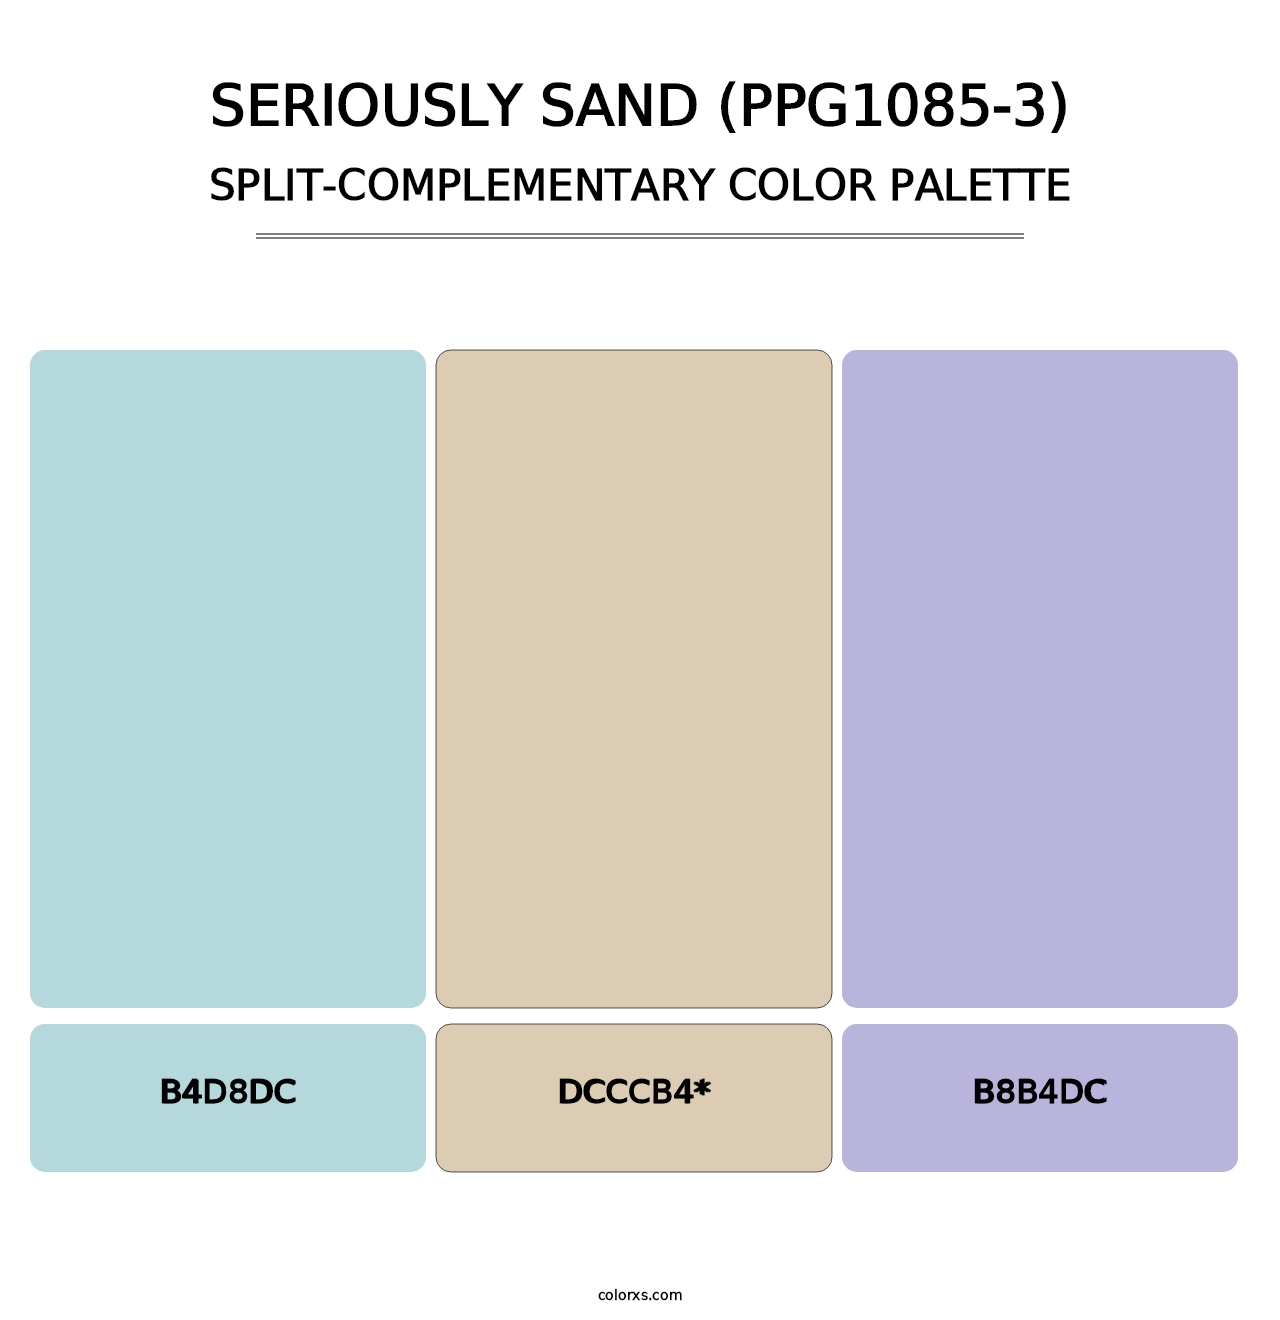 Seriously Sand (PPG1085-3) - Split-Complementary Color Palette